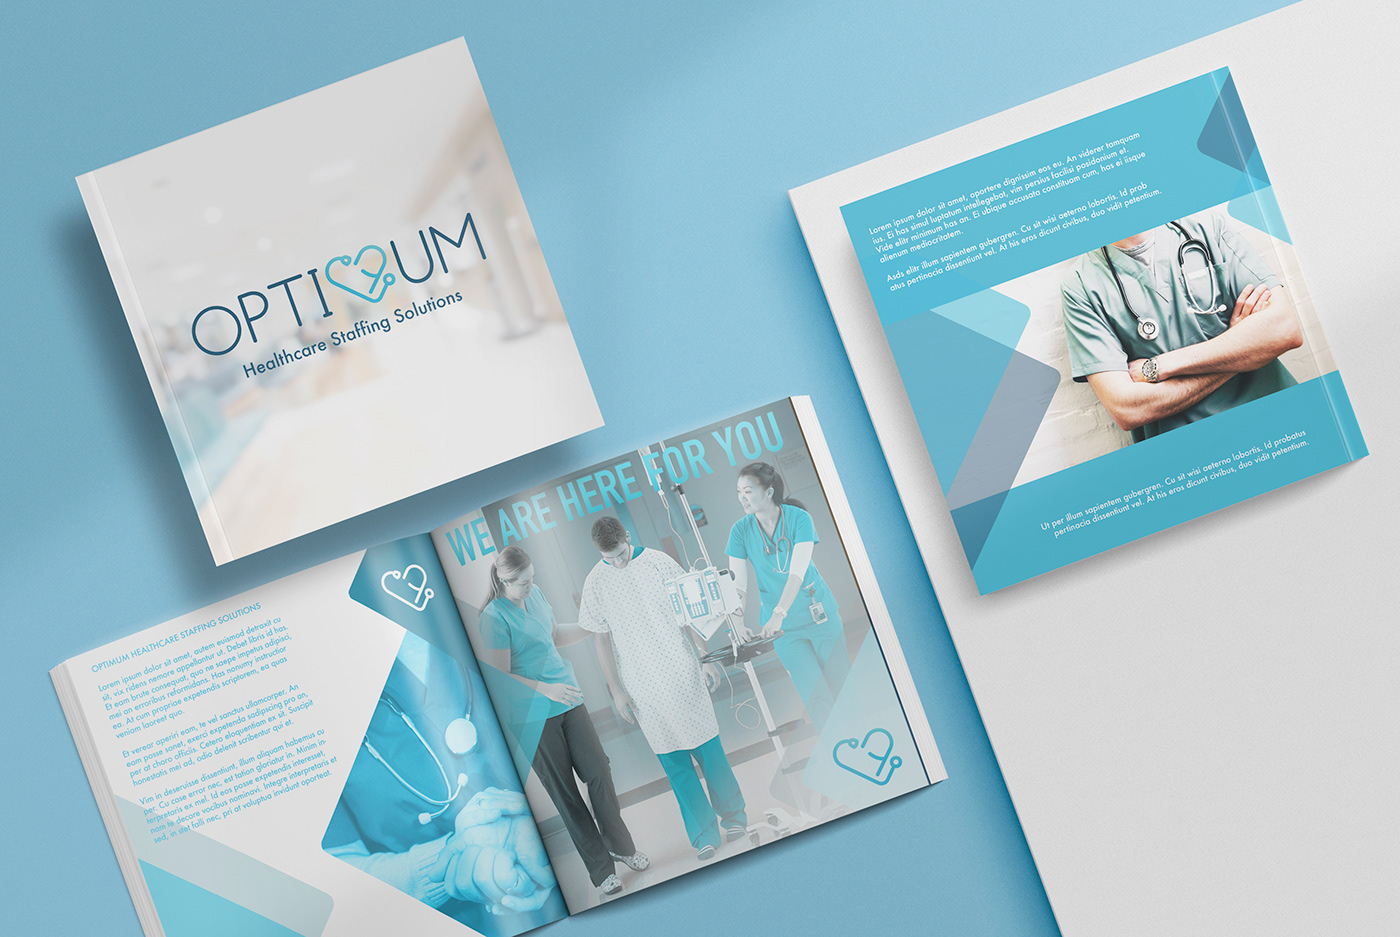 Magazine layout for Optimum Healthcare Staffing Solutions. This tells about their marketing story.
